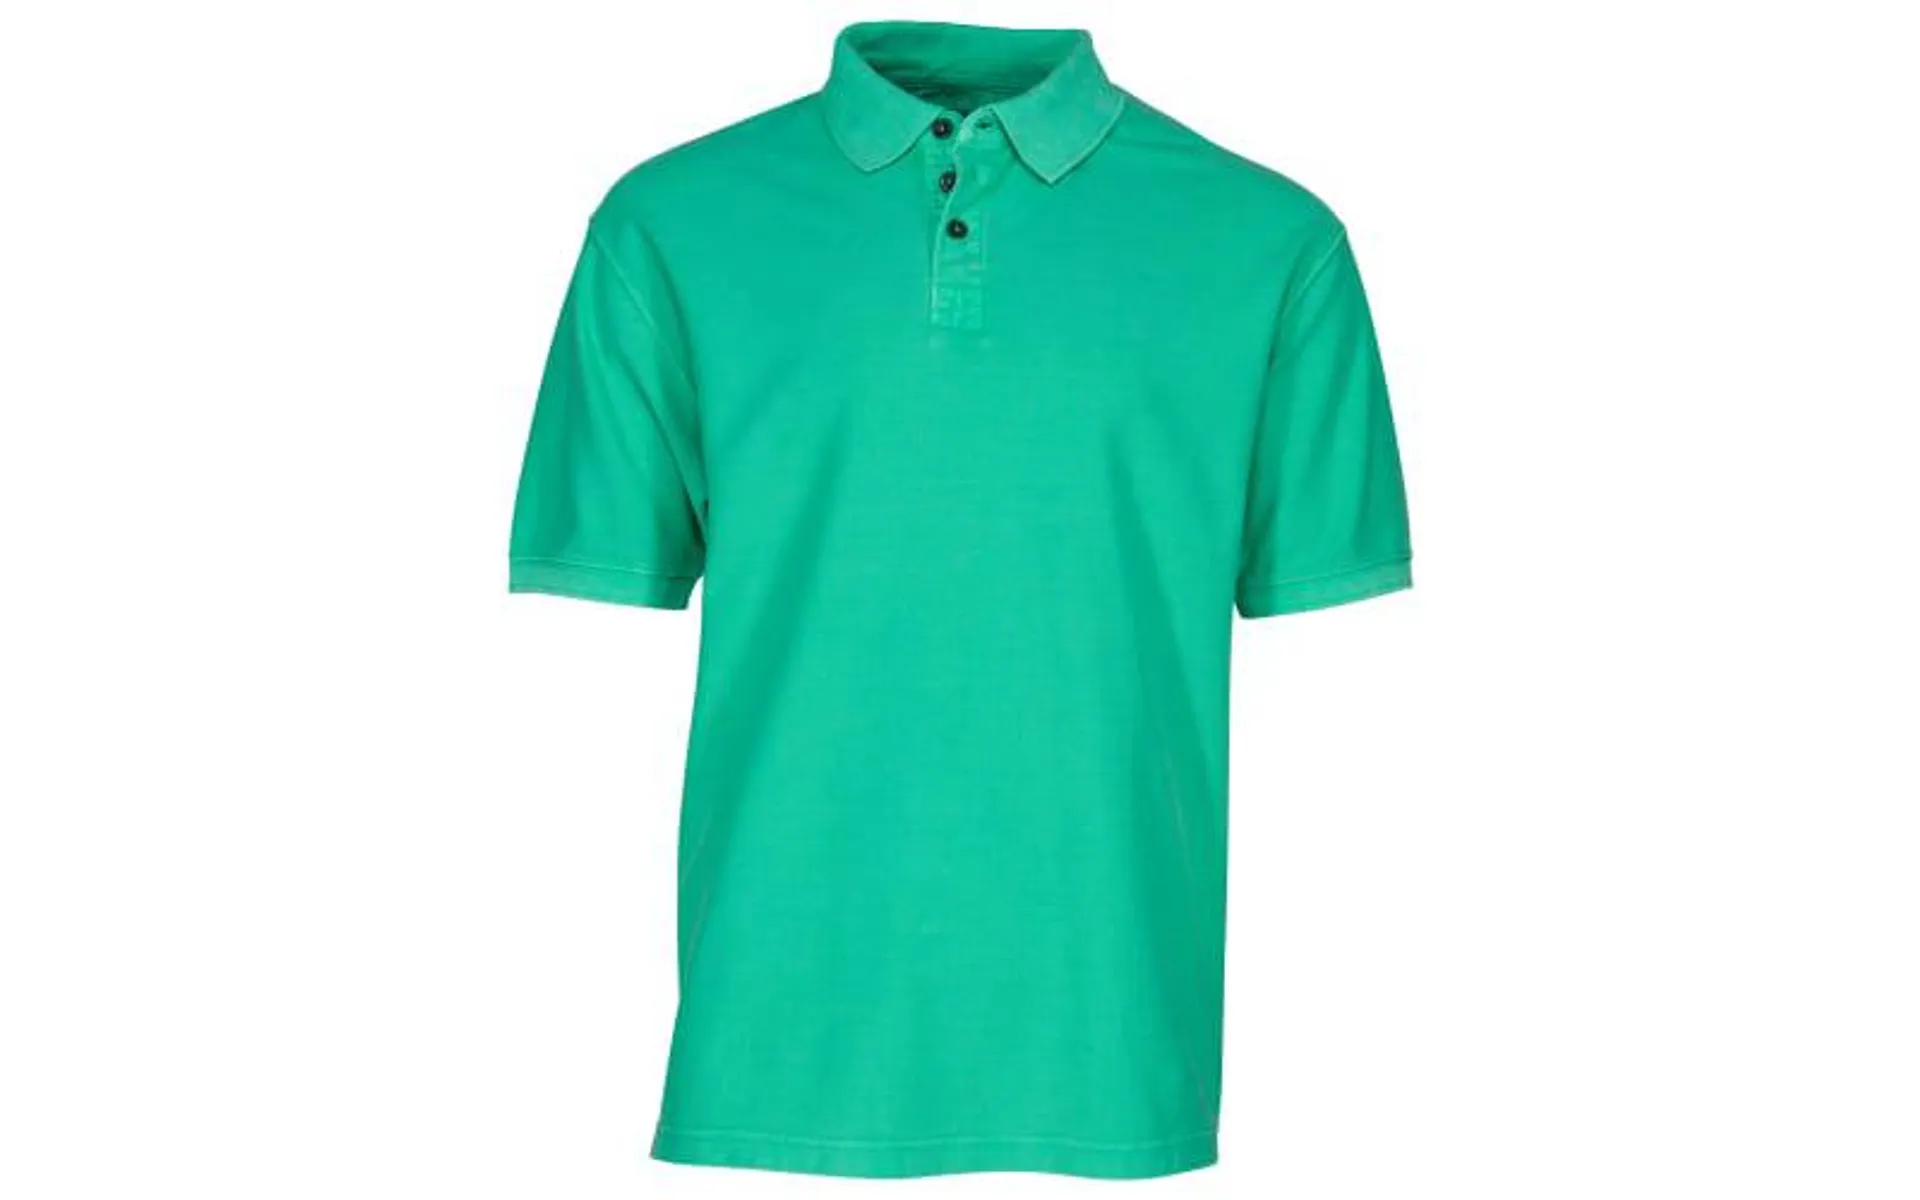 RedHead The Classic Polo Short-Sleeve Shirt for Men